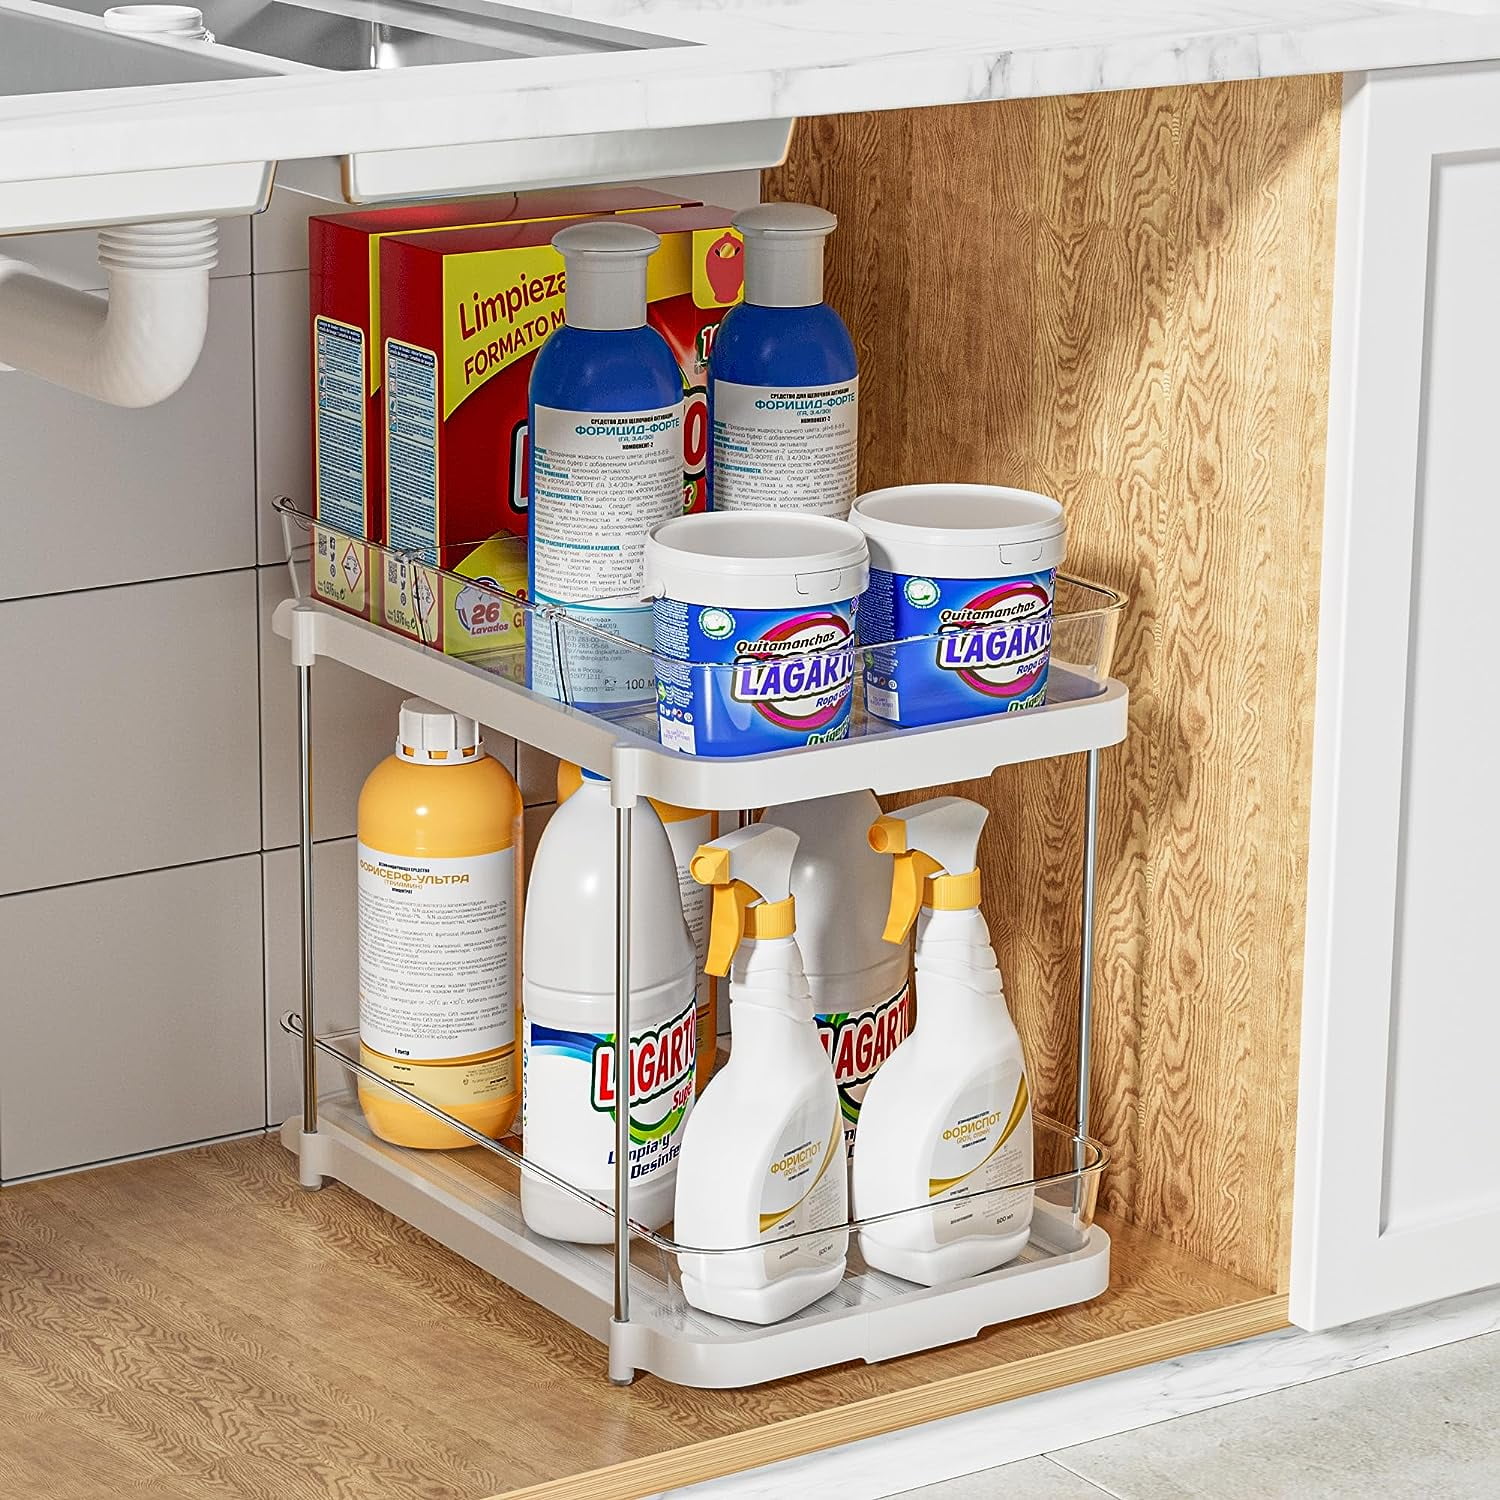 How To Maximize Storage Under The Kitchen Sink – Come Home For Comfort